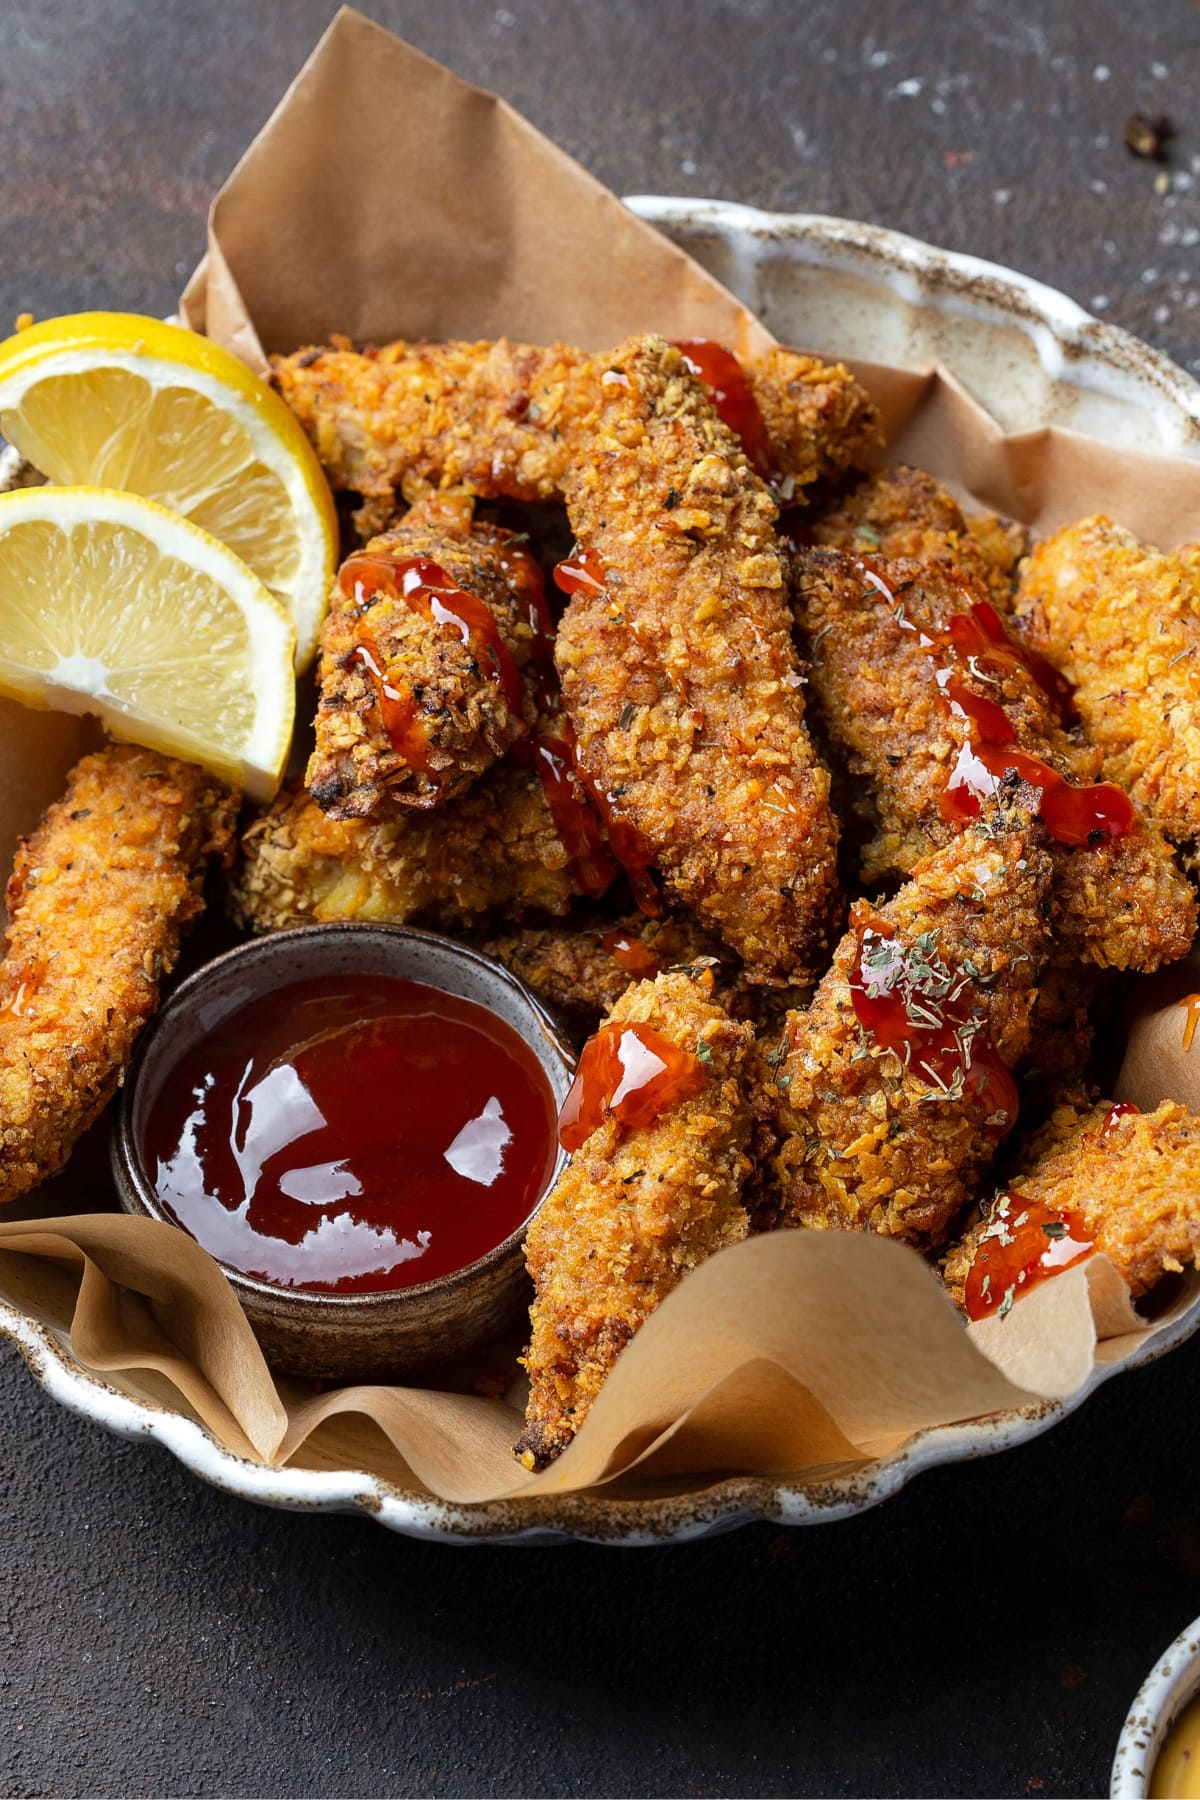 Homemade Chicken Strips with Ketchup and Lemons